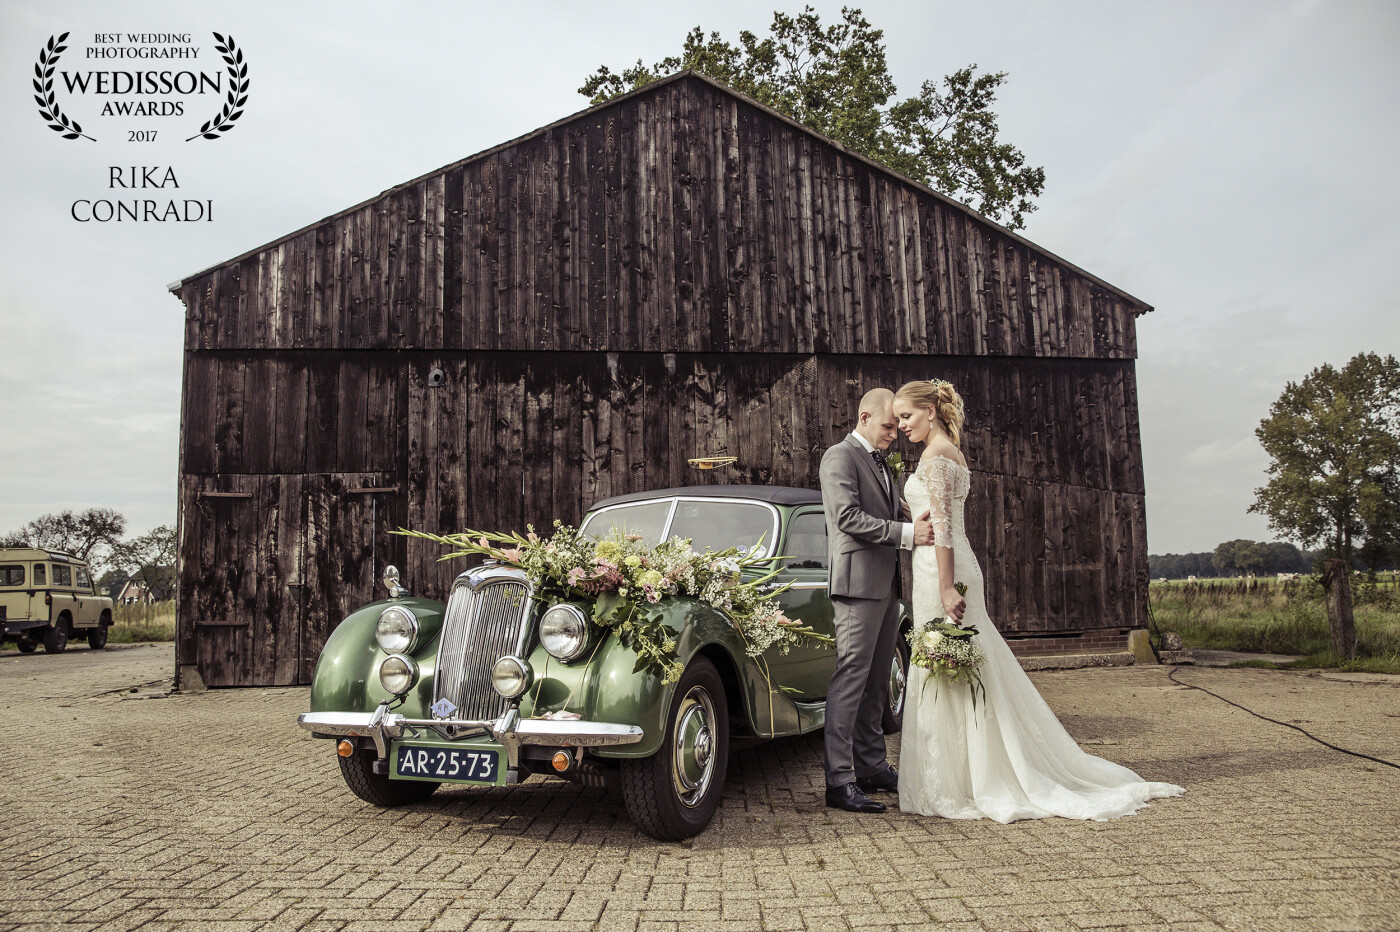 Wedding on a farm was something I always wanted to do. So I was so much in luck with this stunning couple. It was the farm of the mother of the bride and it had so much possibilities! Getting ready, the photoshoot, the ceremony, reception, BBQ and party! And this car! So stunning!